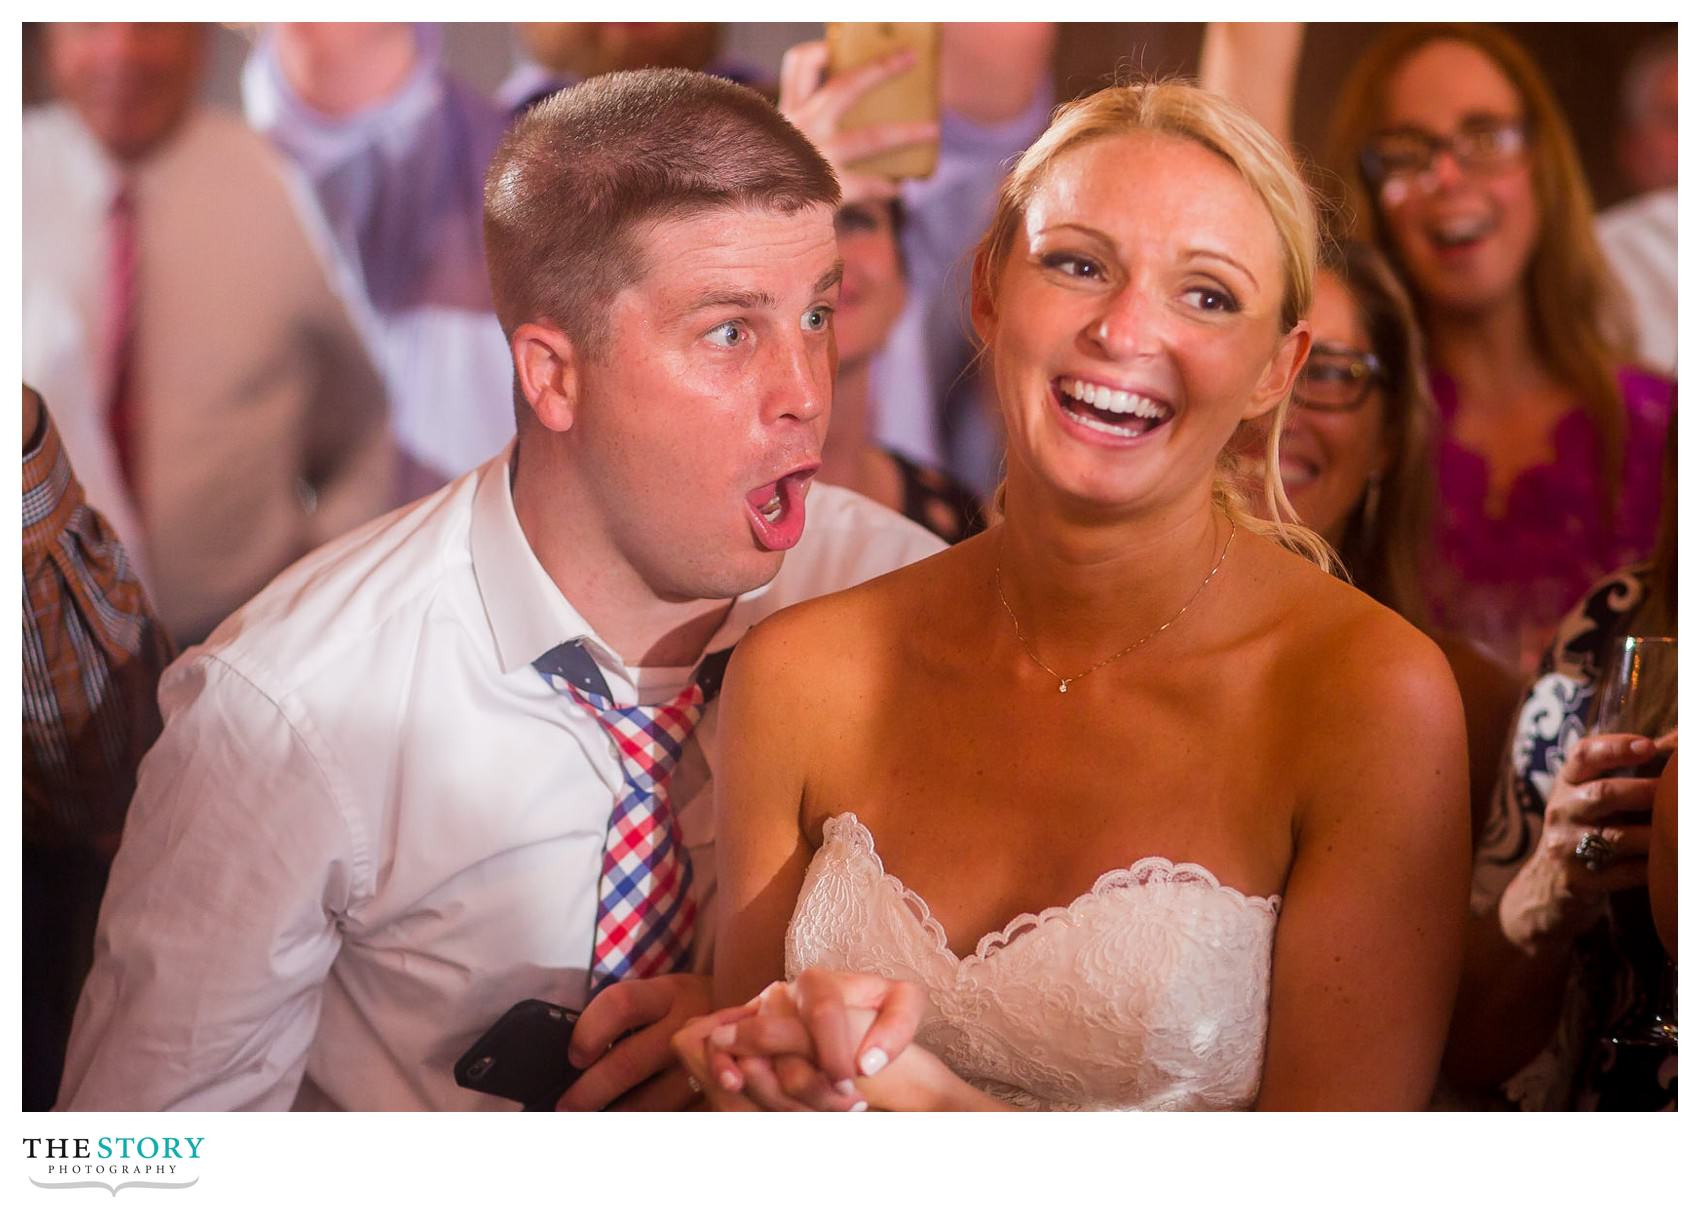 wedding guest having fun with with bride at wedding reception